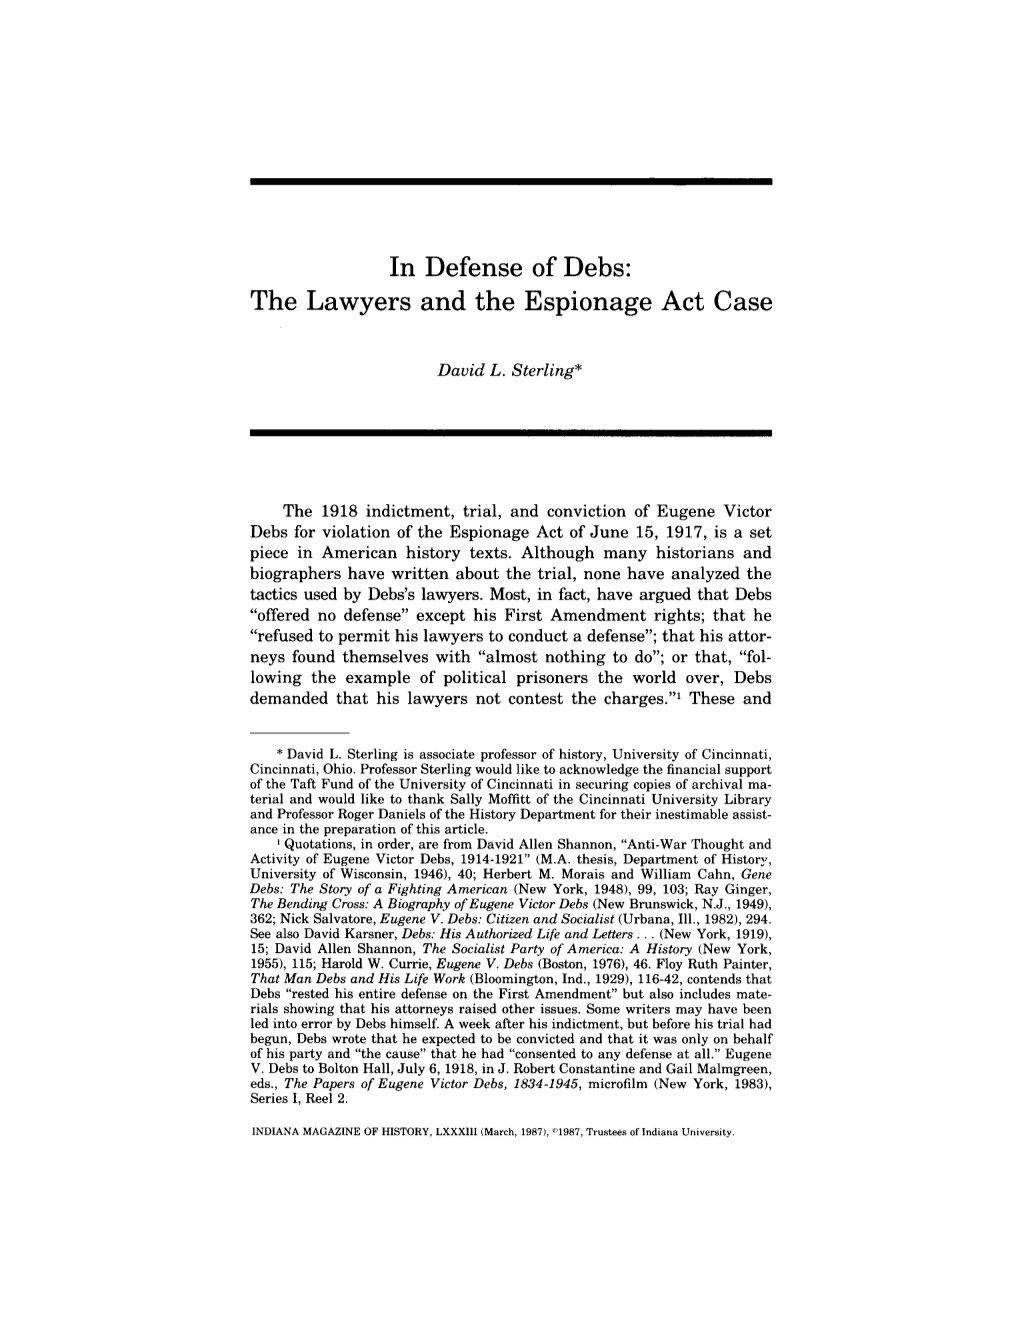 In Defense of Debs: the Lawyers and the Espionage Act Case